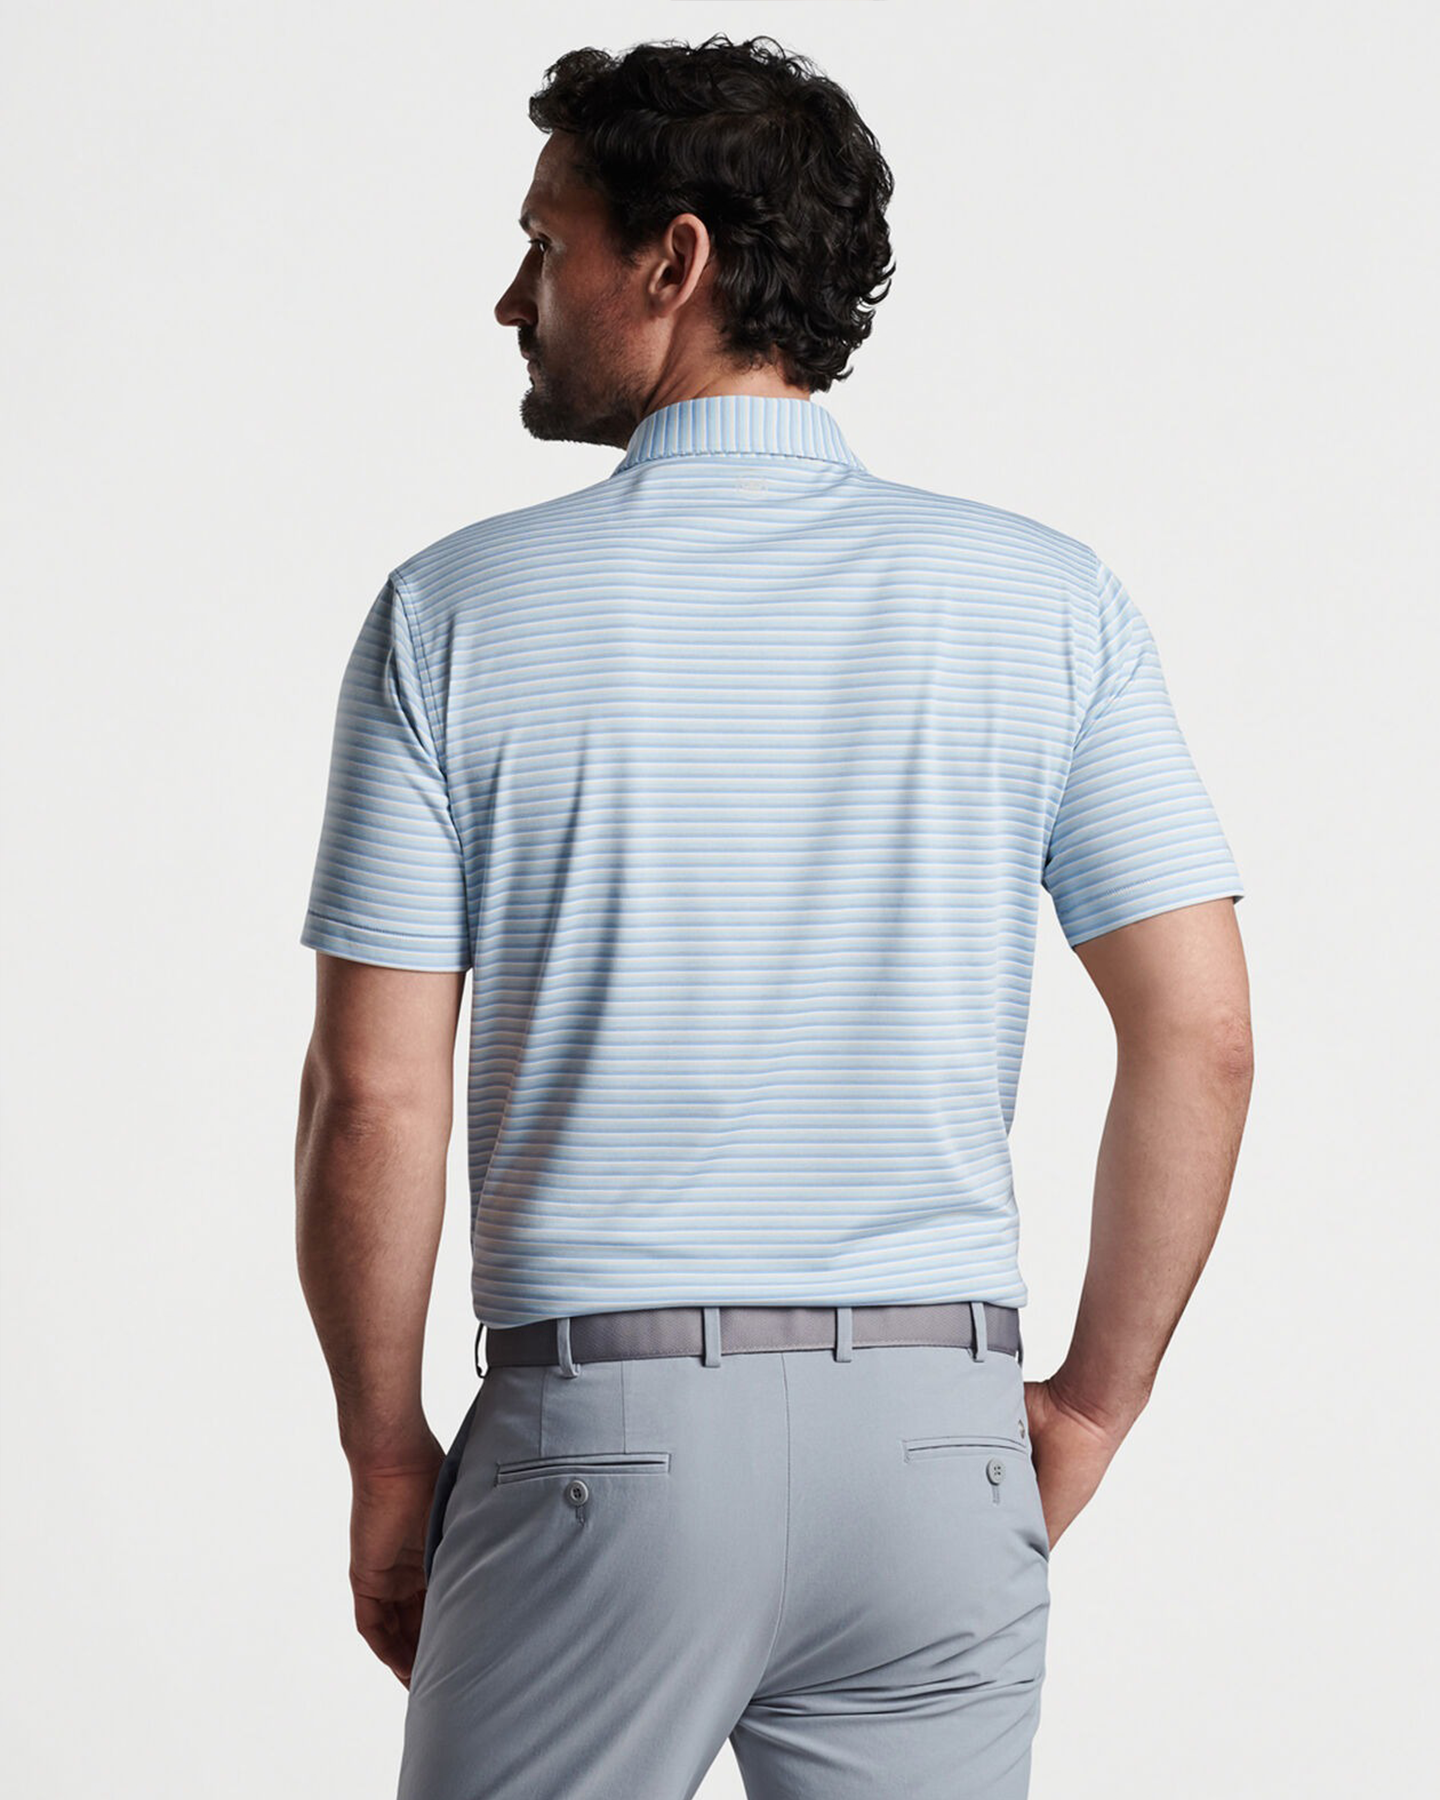 MCCRAVEN PERFORMANCE JERSEY POLO - BLUE FROST